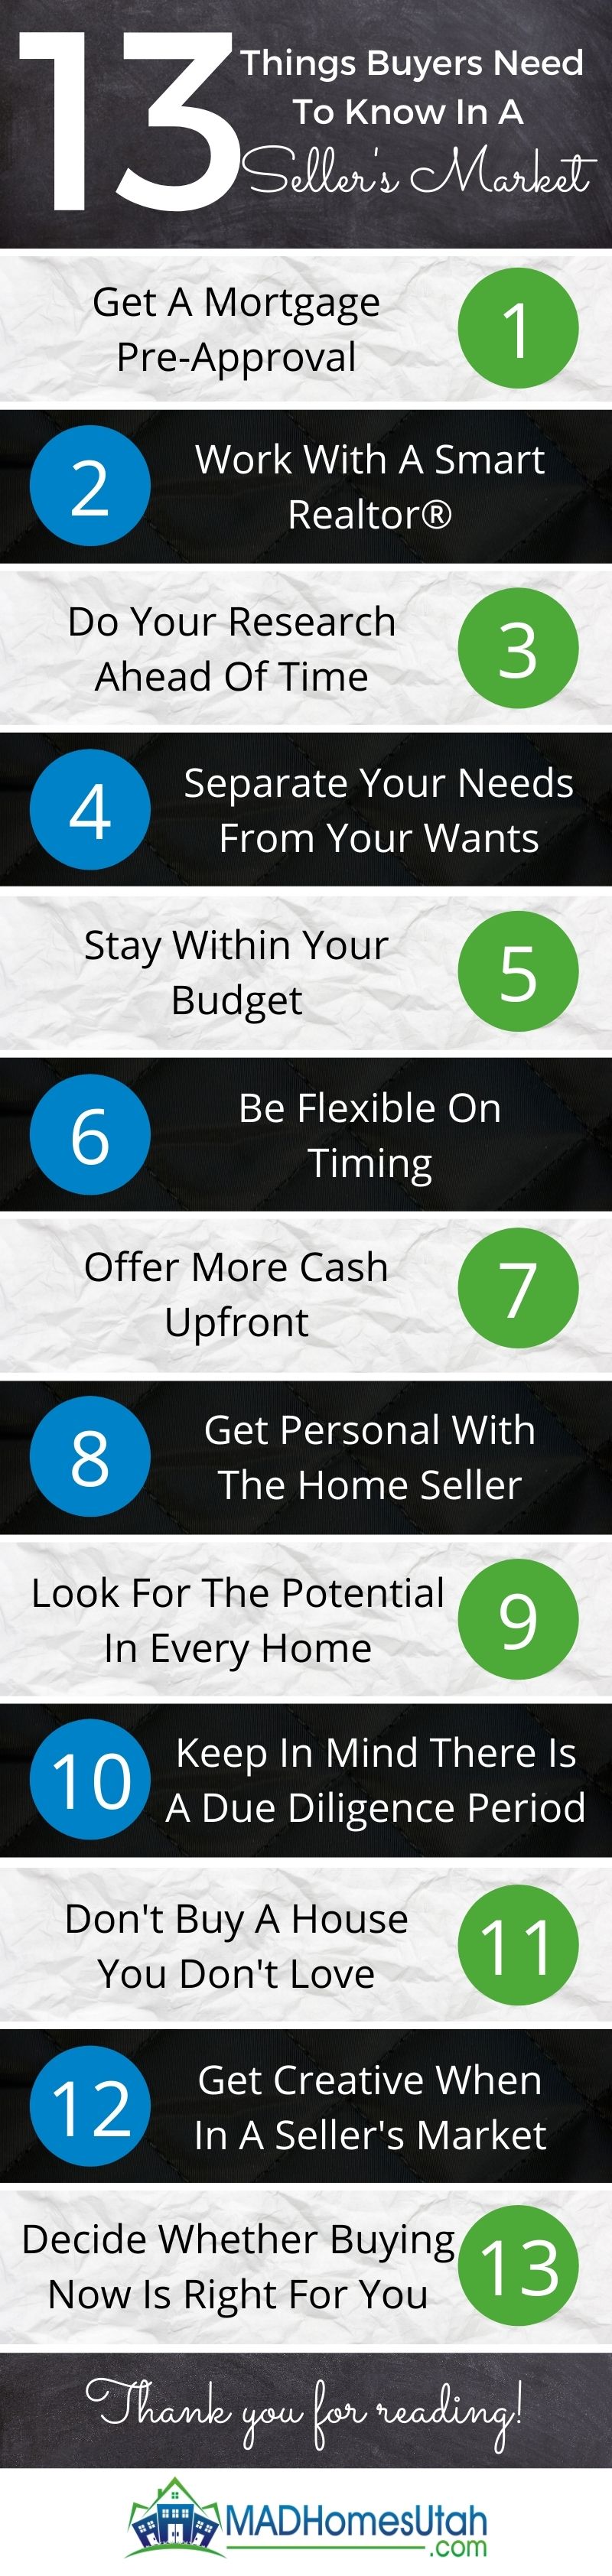 Image - Infographic of the 13 things buyers need to know in a sellers market